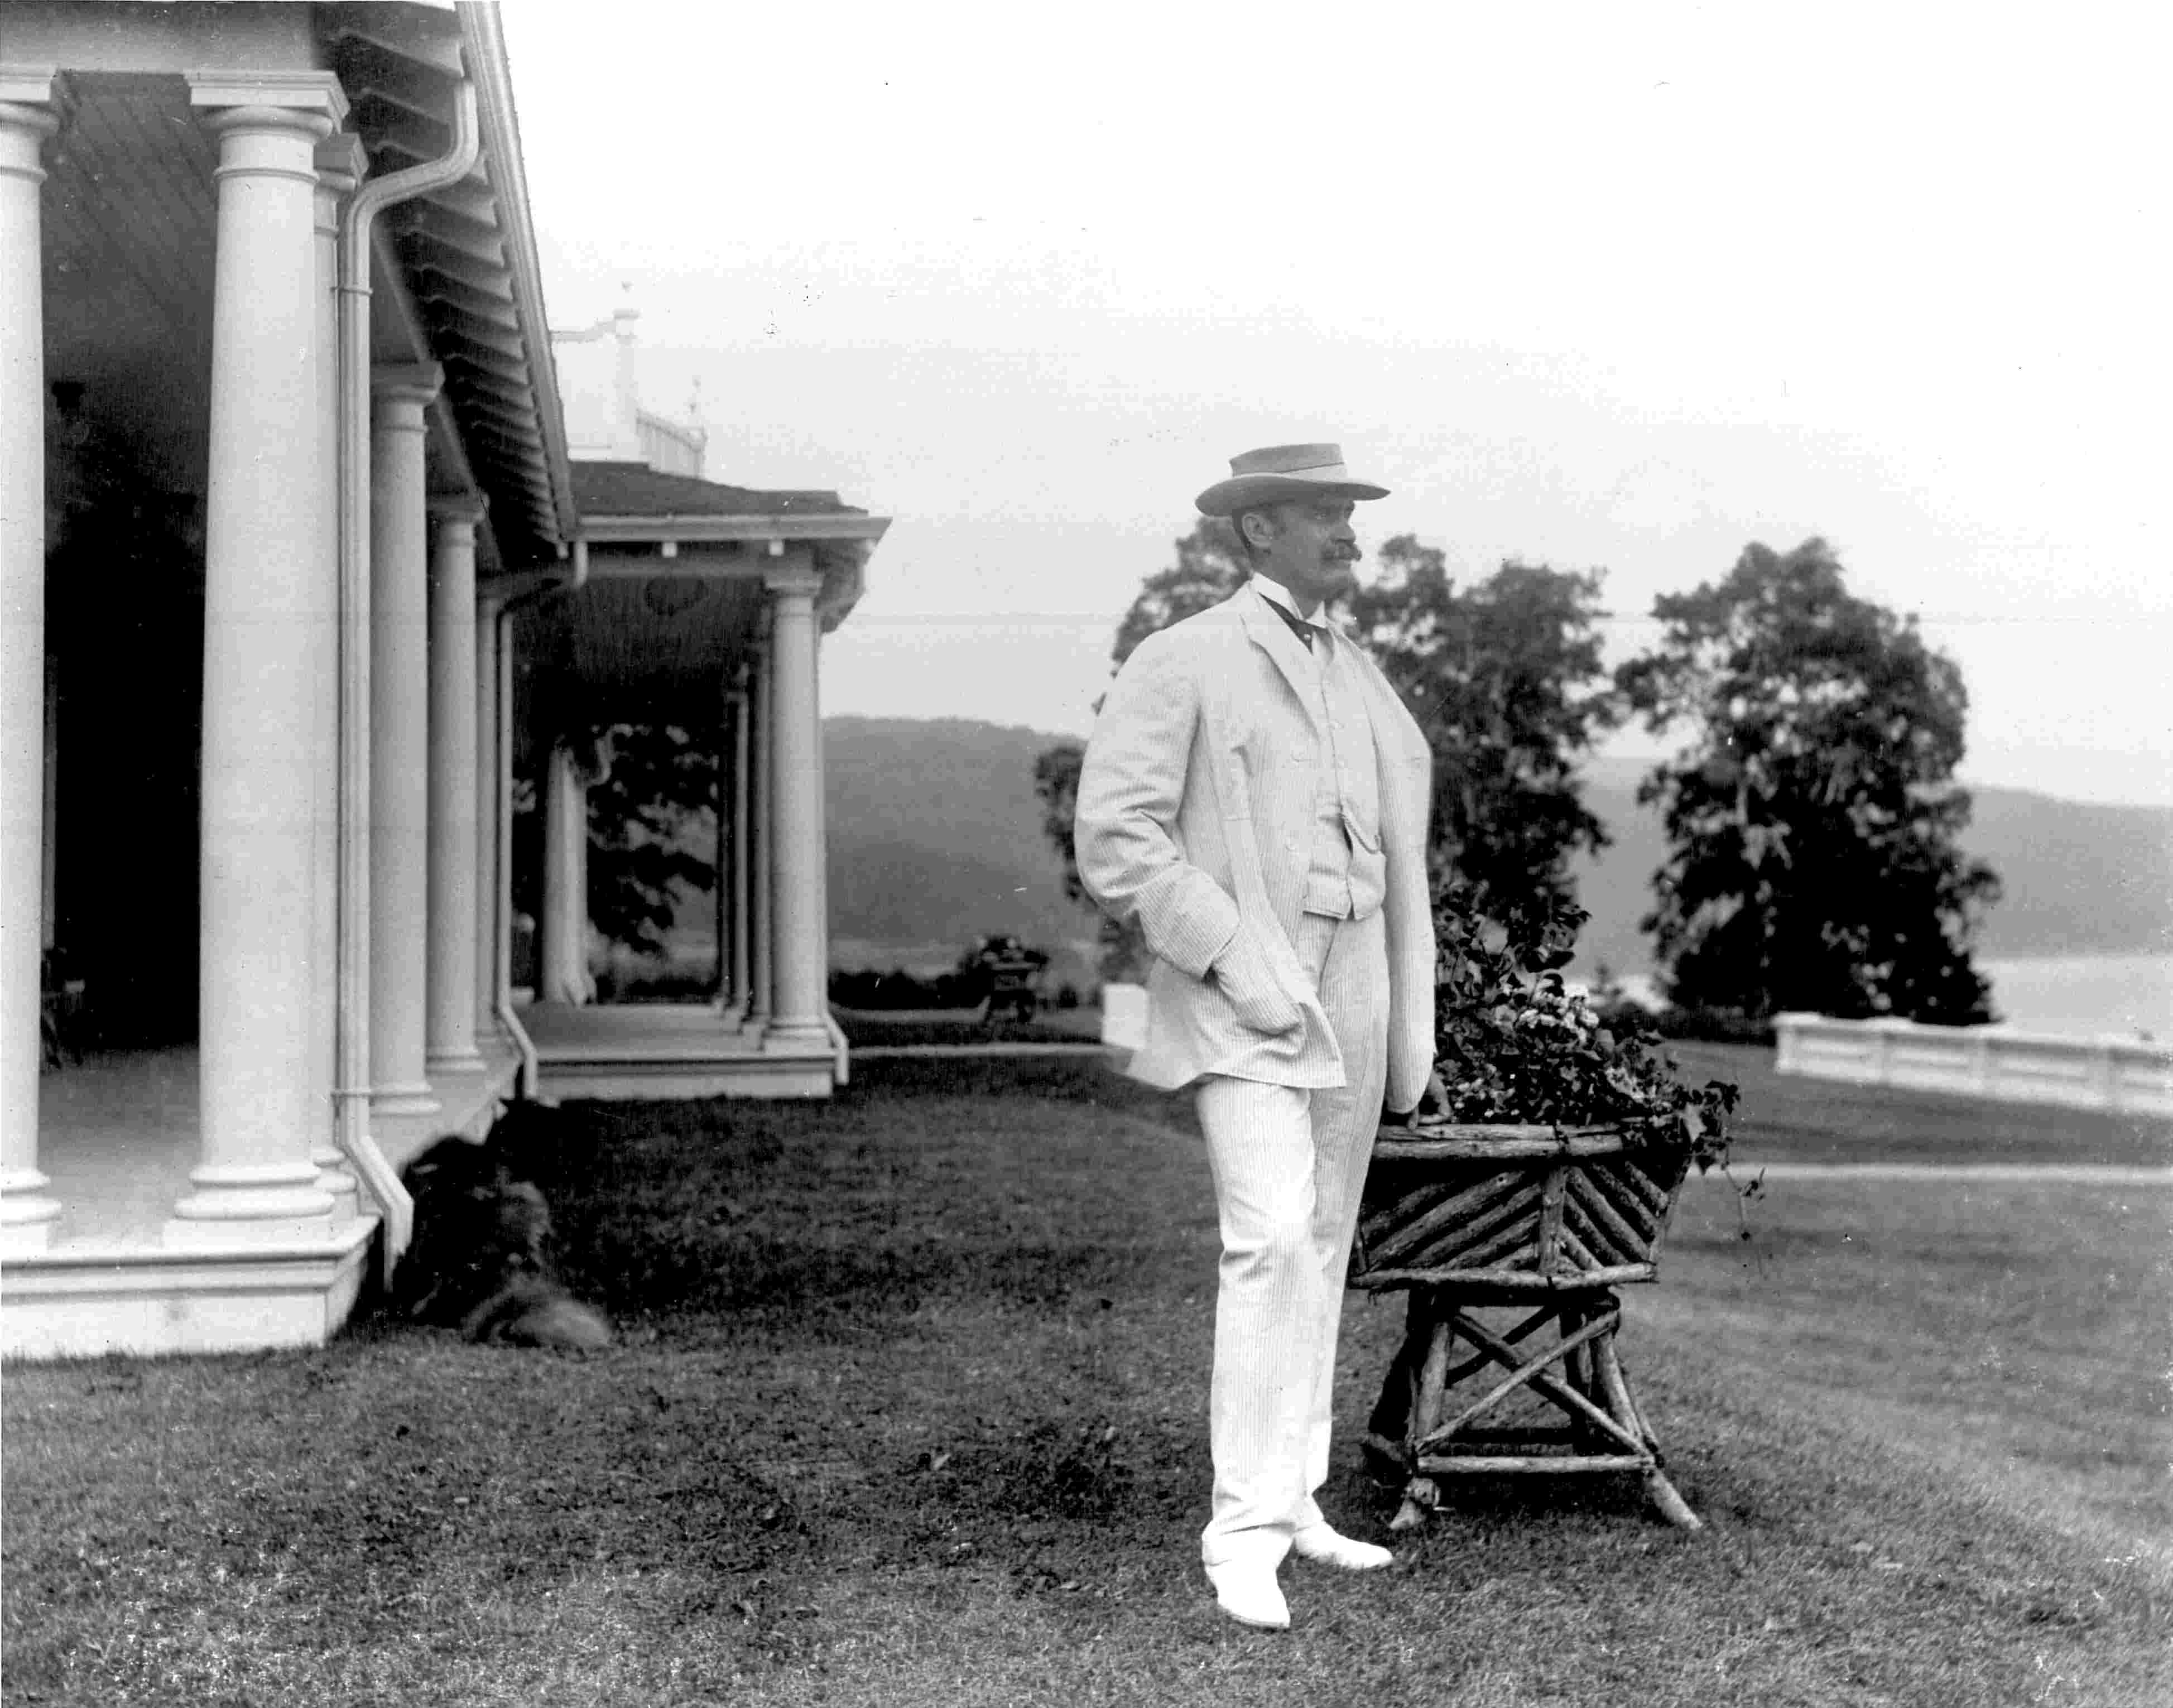 An elegant man wearing white and posing near an impressive residence, with a dog lying beside the house.